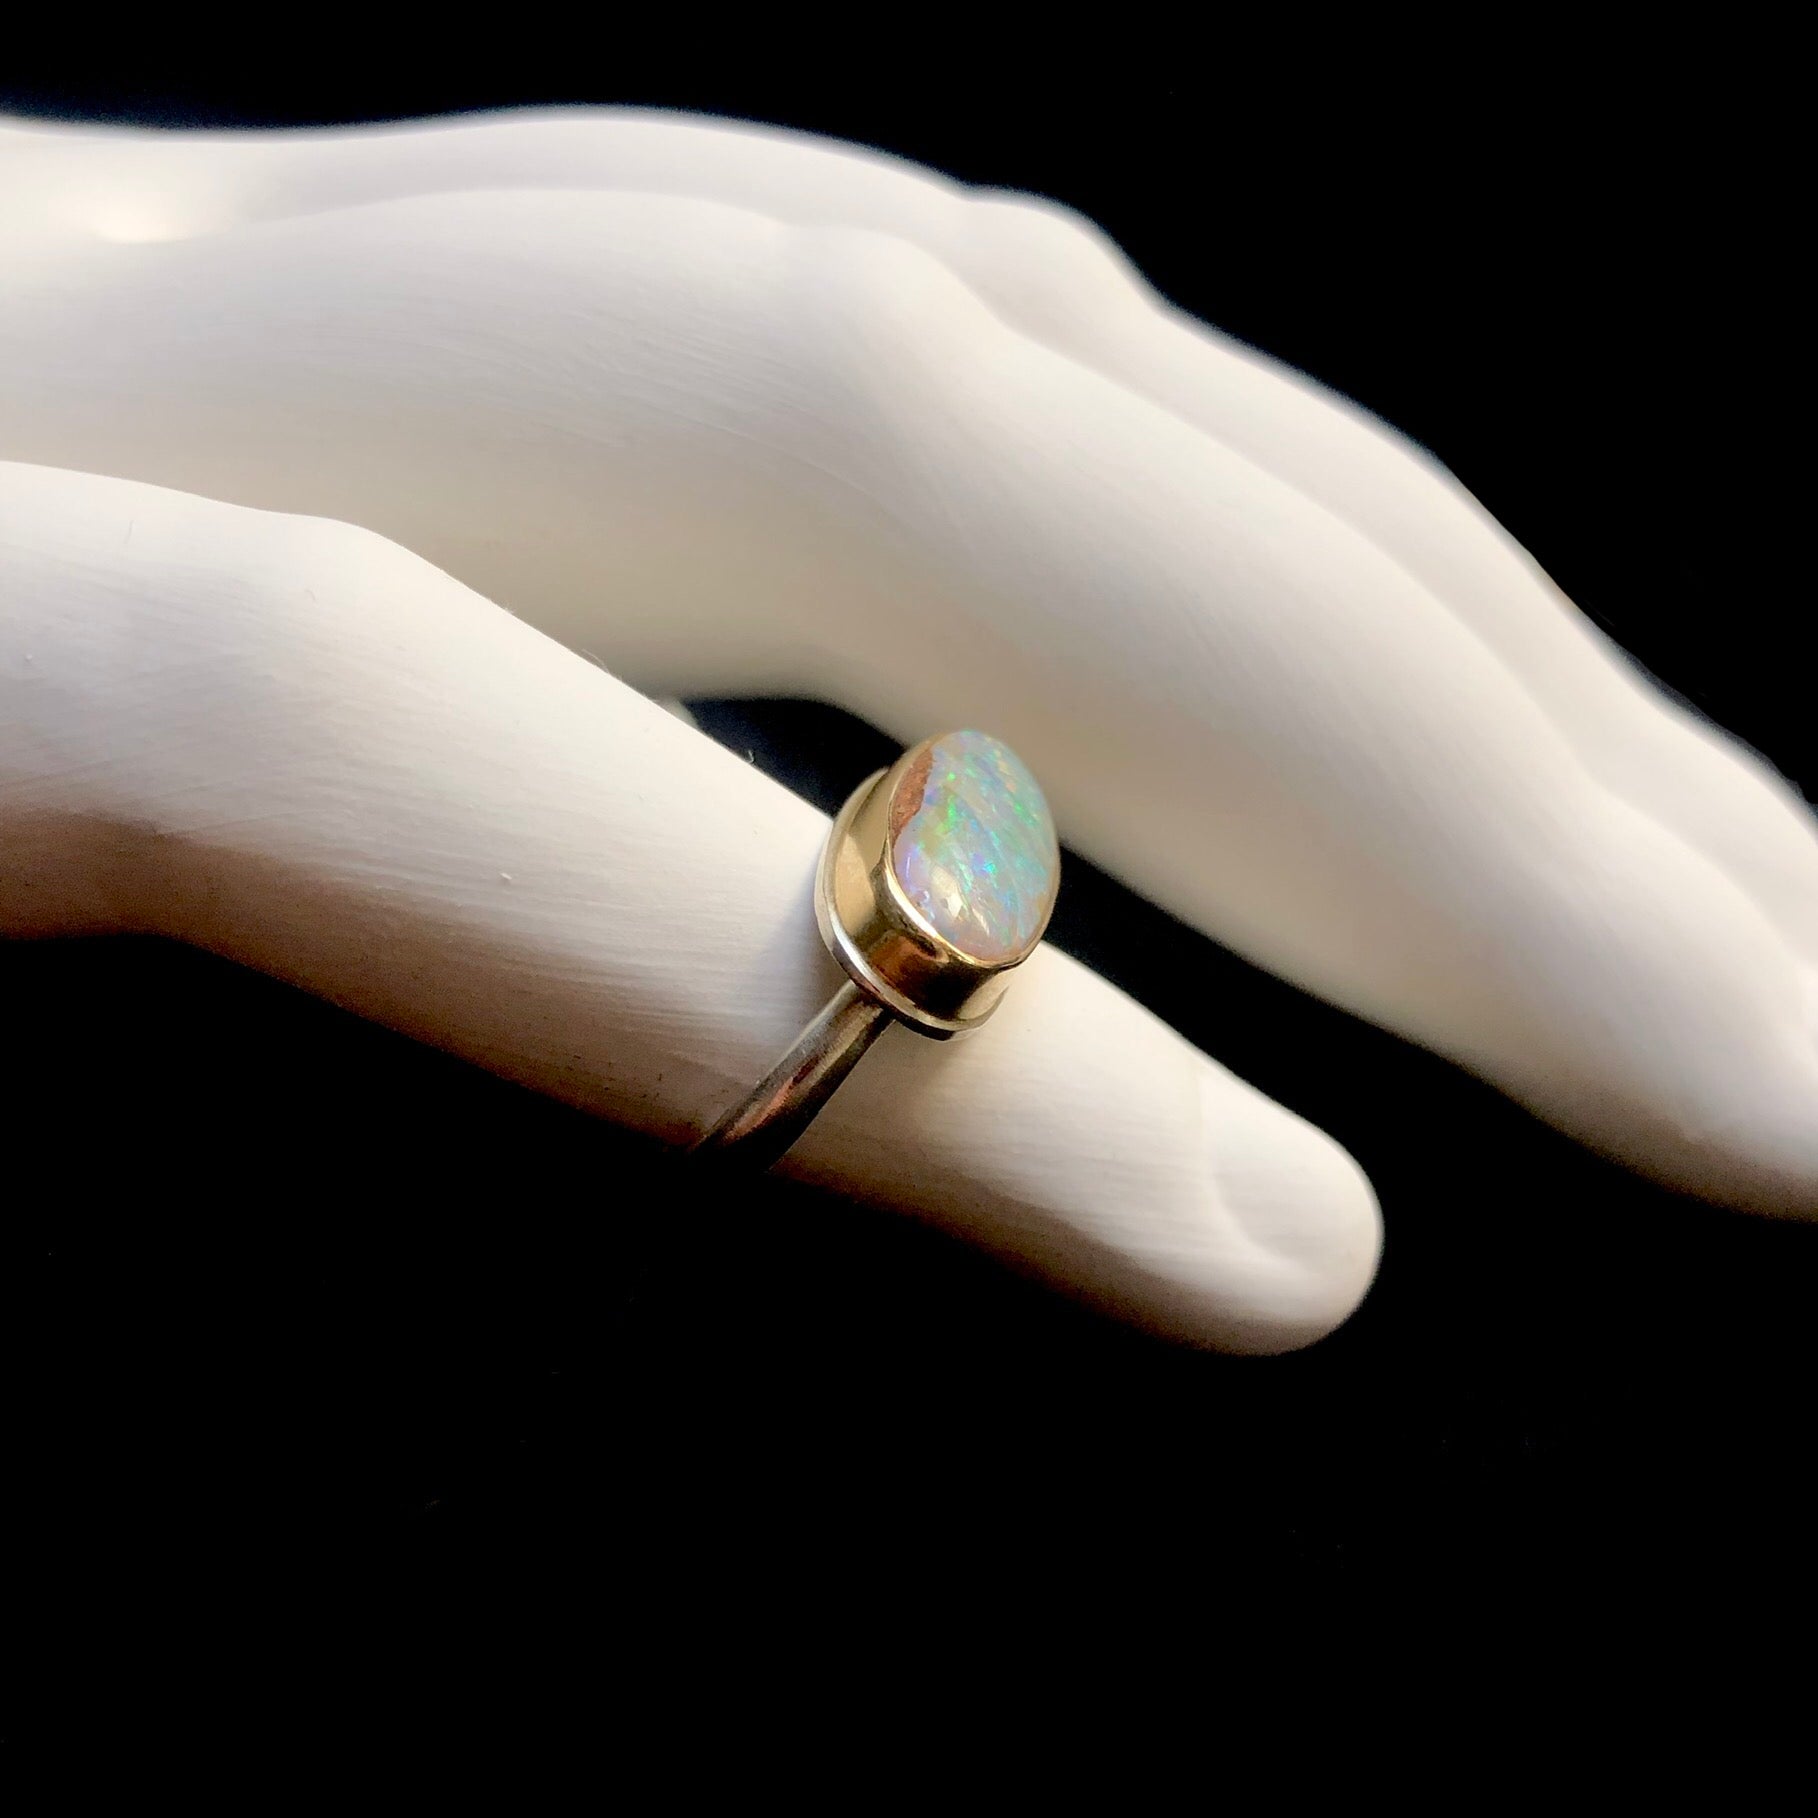 Side view of Fossilized Opalized Wood ring with gold setting and silver band on white ceramic finger